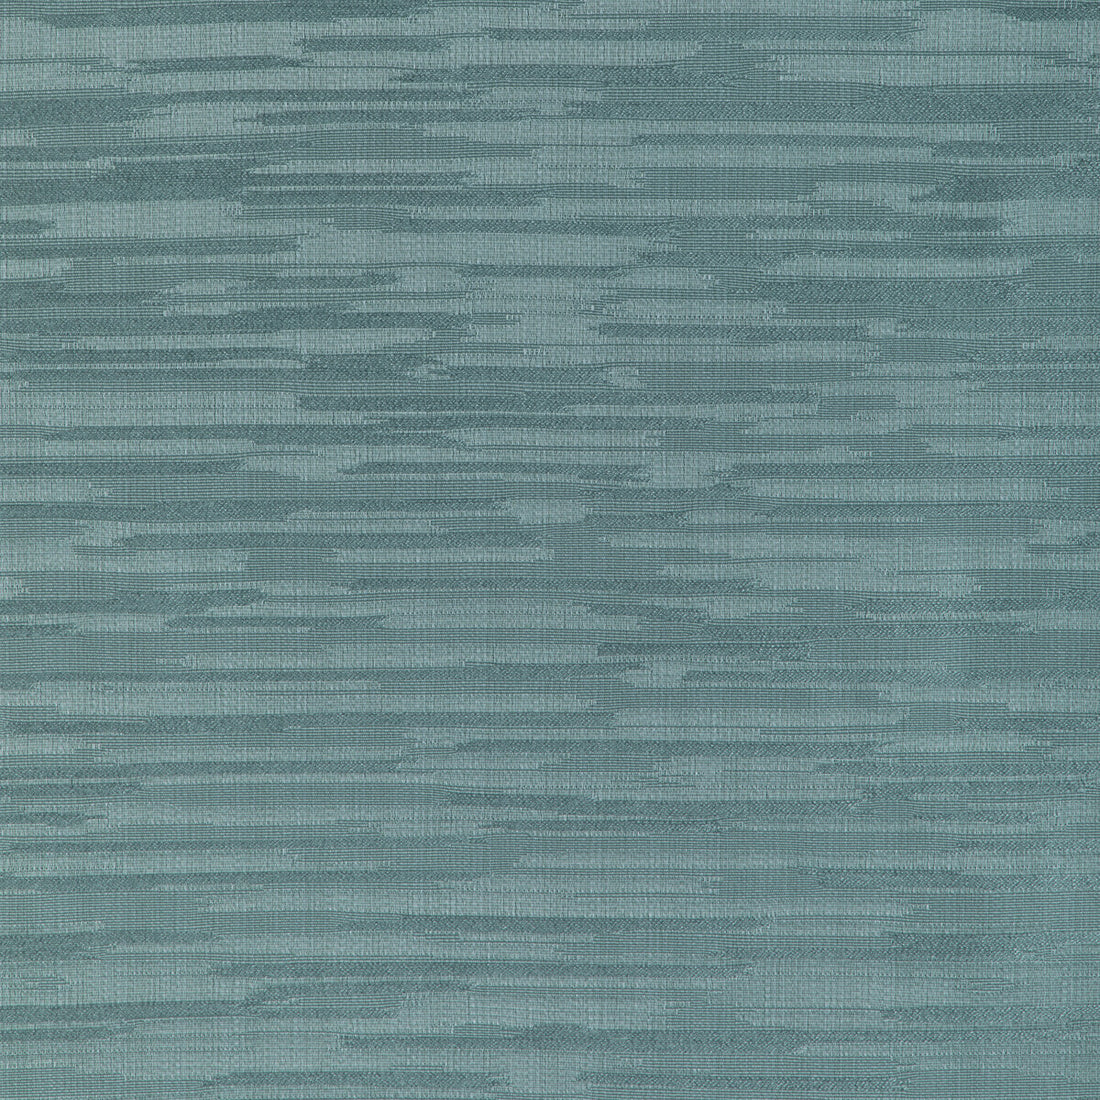 Arles Weave fabric in aqua color - pattern 8023134.13.0 - by Brunschwig &amp; Fils in the Arles Weaves collection